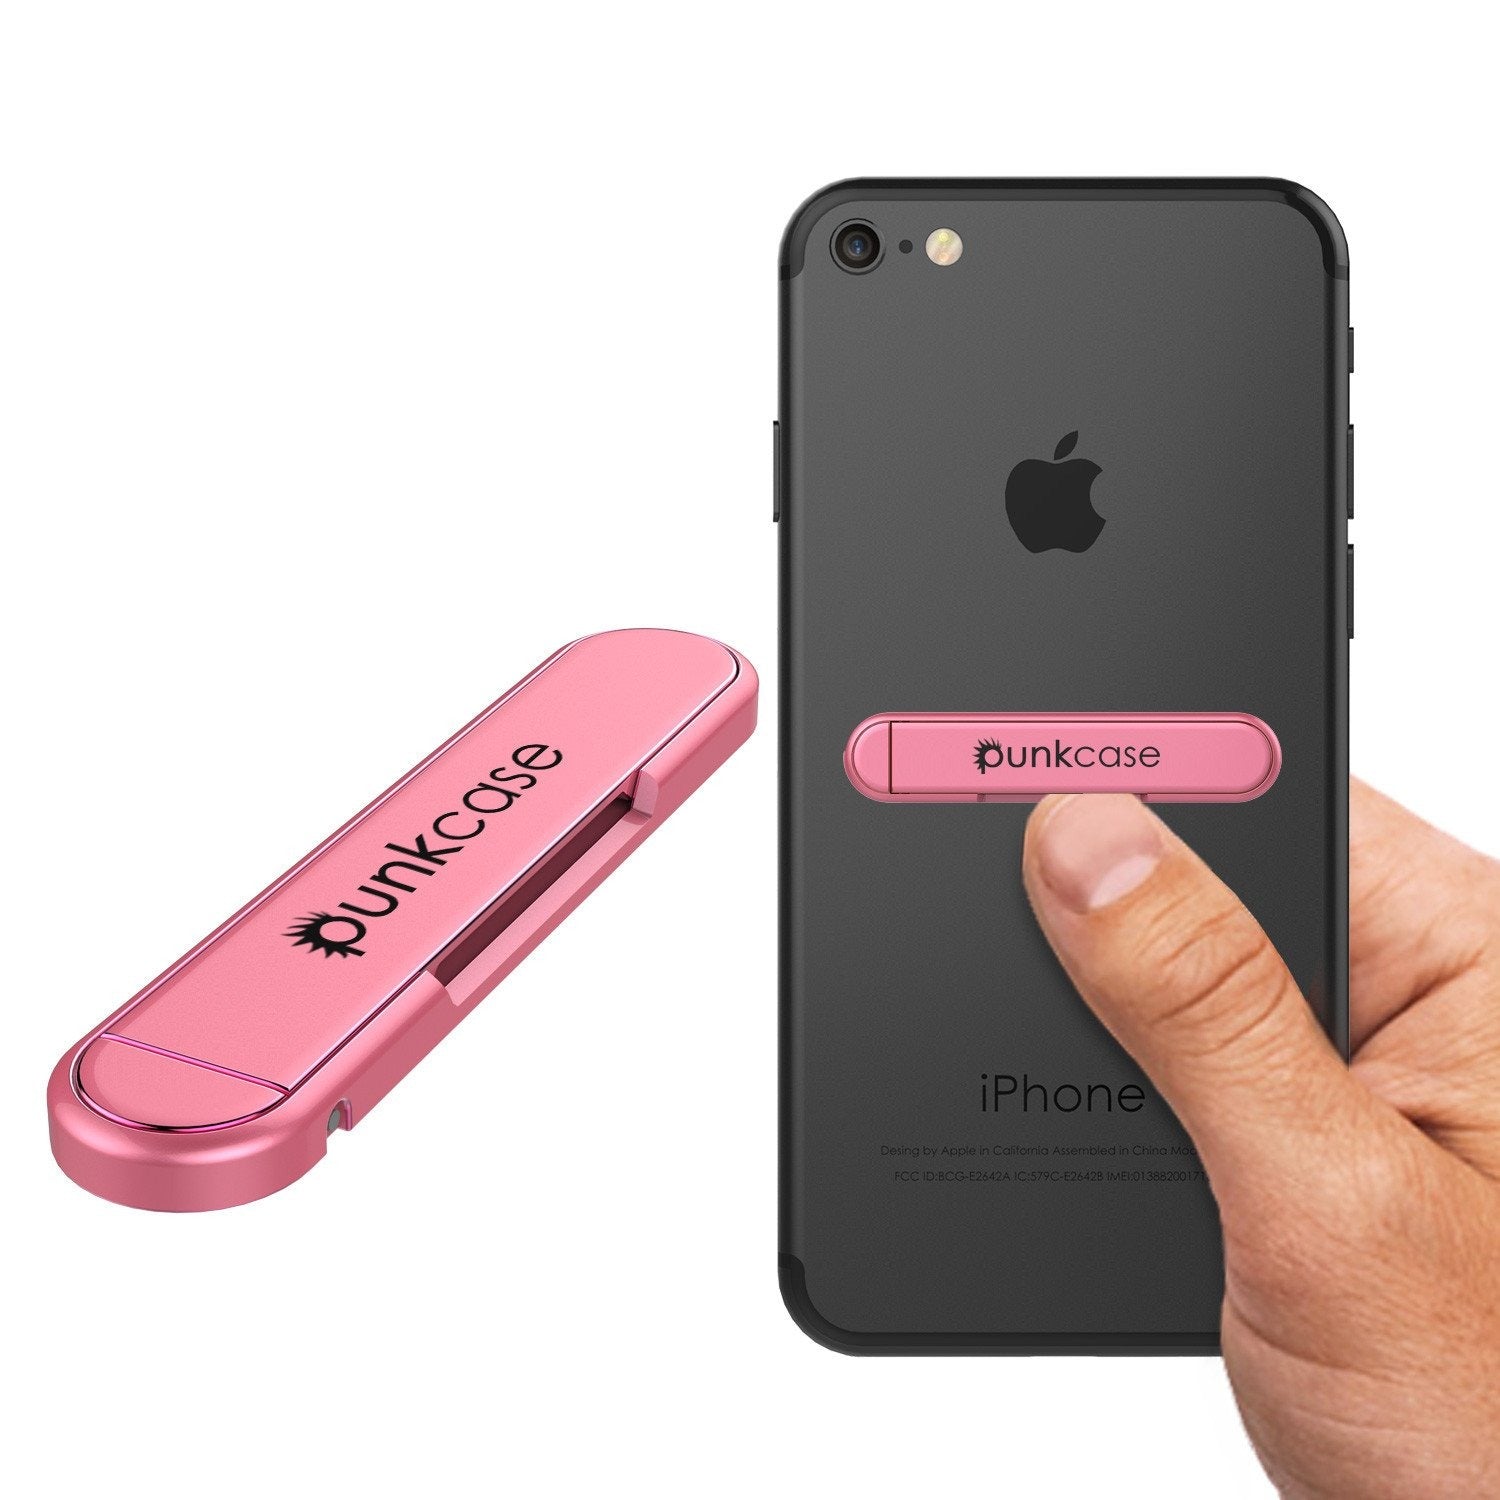 PUNKCASE FlickStick Universal Cell Phone Kickstand for all Mobile Phones & Cases with Flat Backs, One Finger Operation (Pink) (Color in image: Pink)